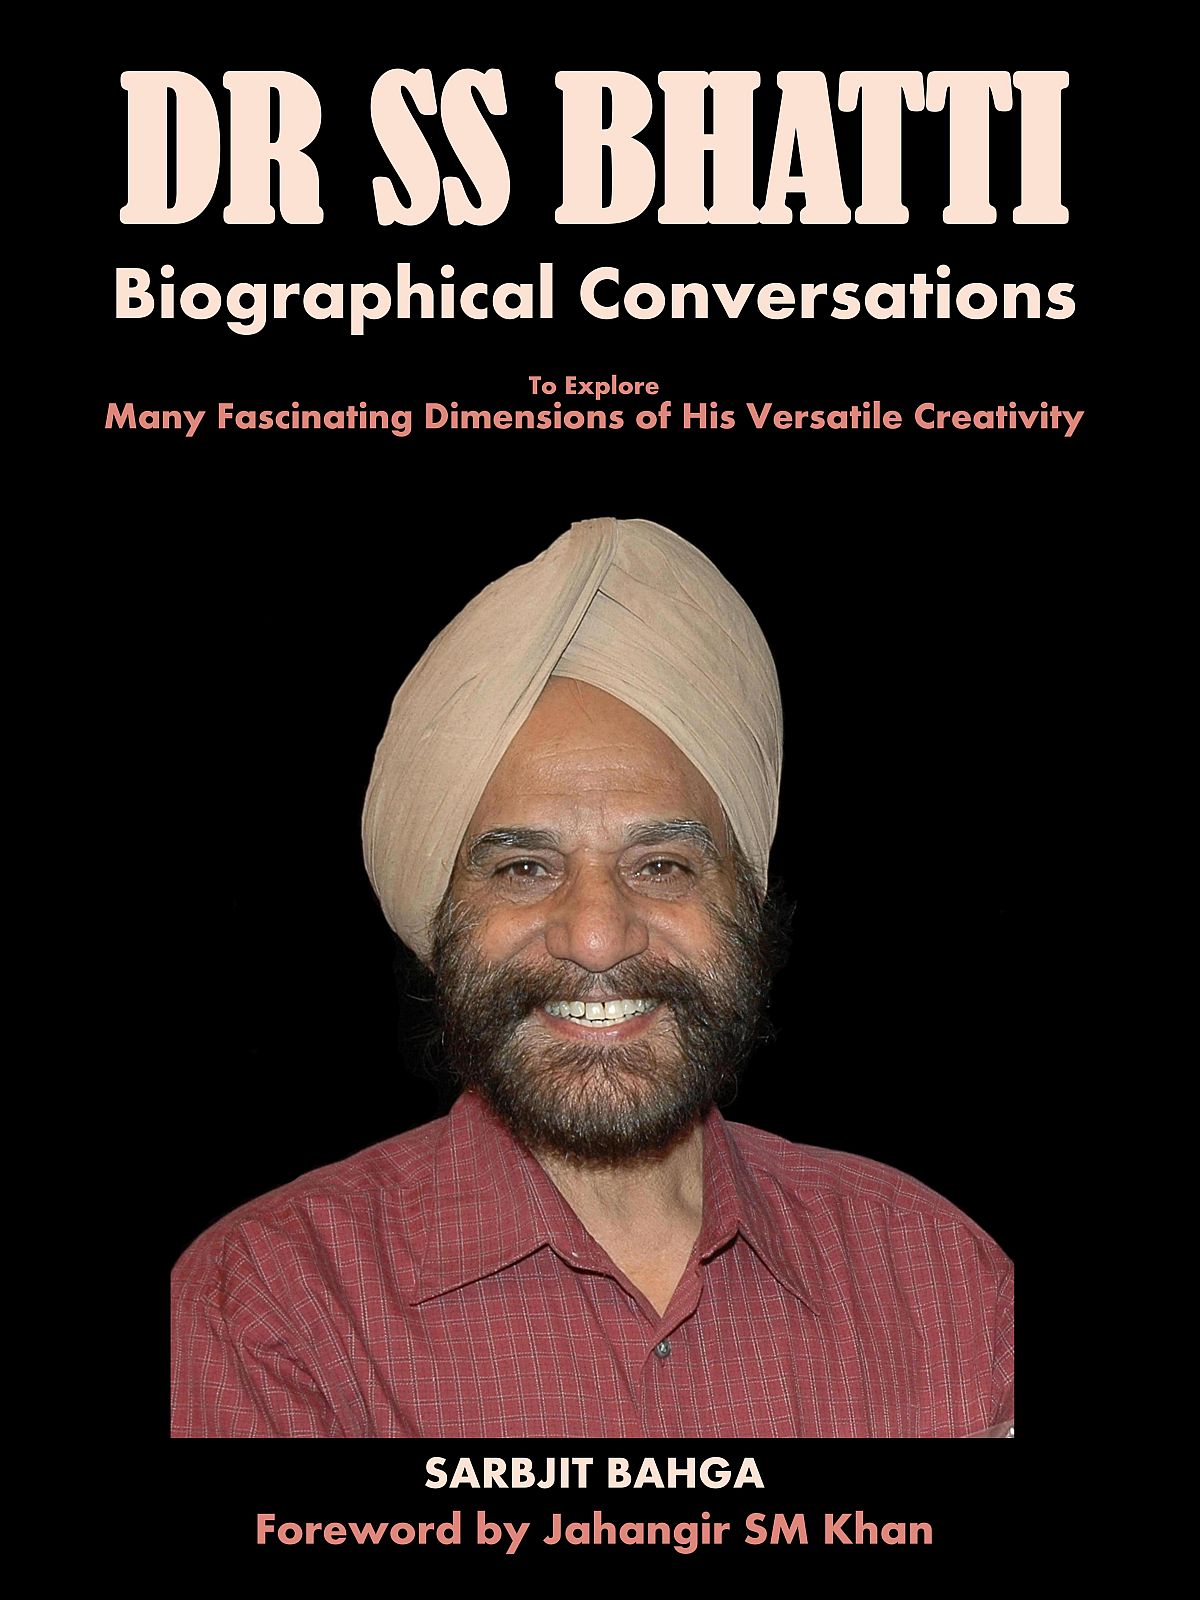 Book: Dr S.S.Bhatti: Biographical Conversations, authored by Sarbjit Bahga, Reviewed by Surinder Bahga 1